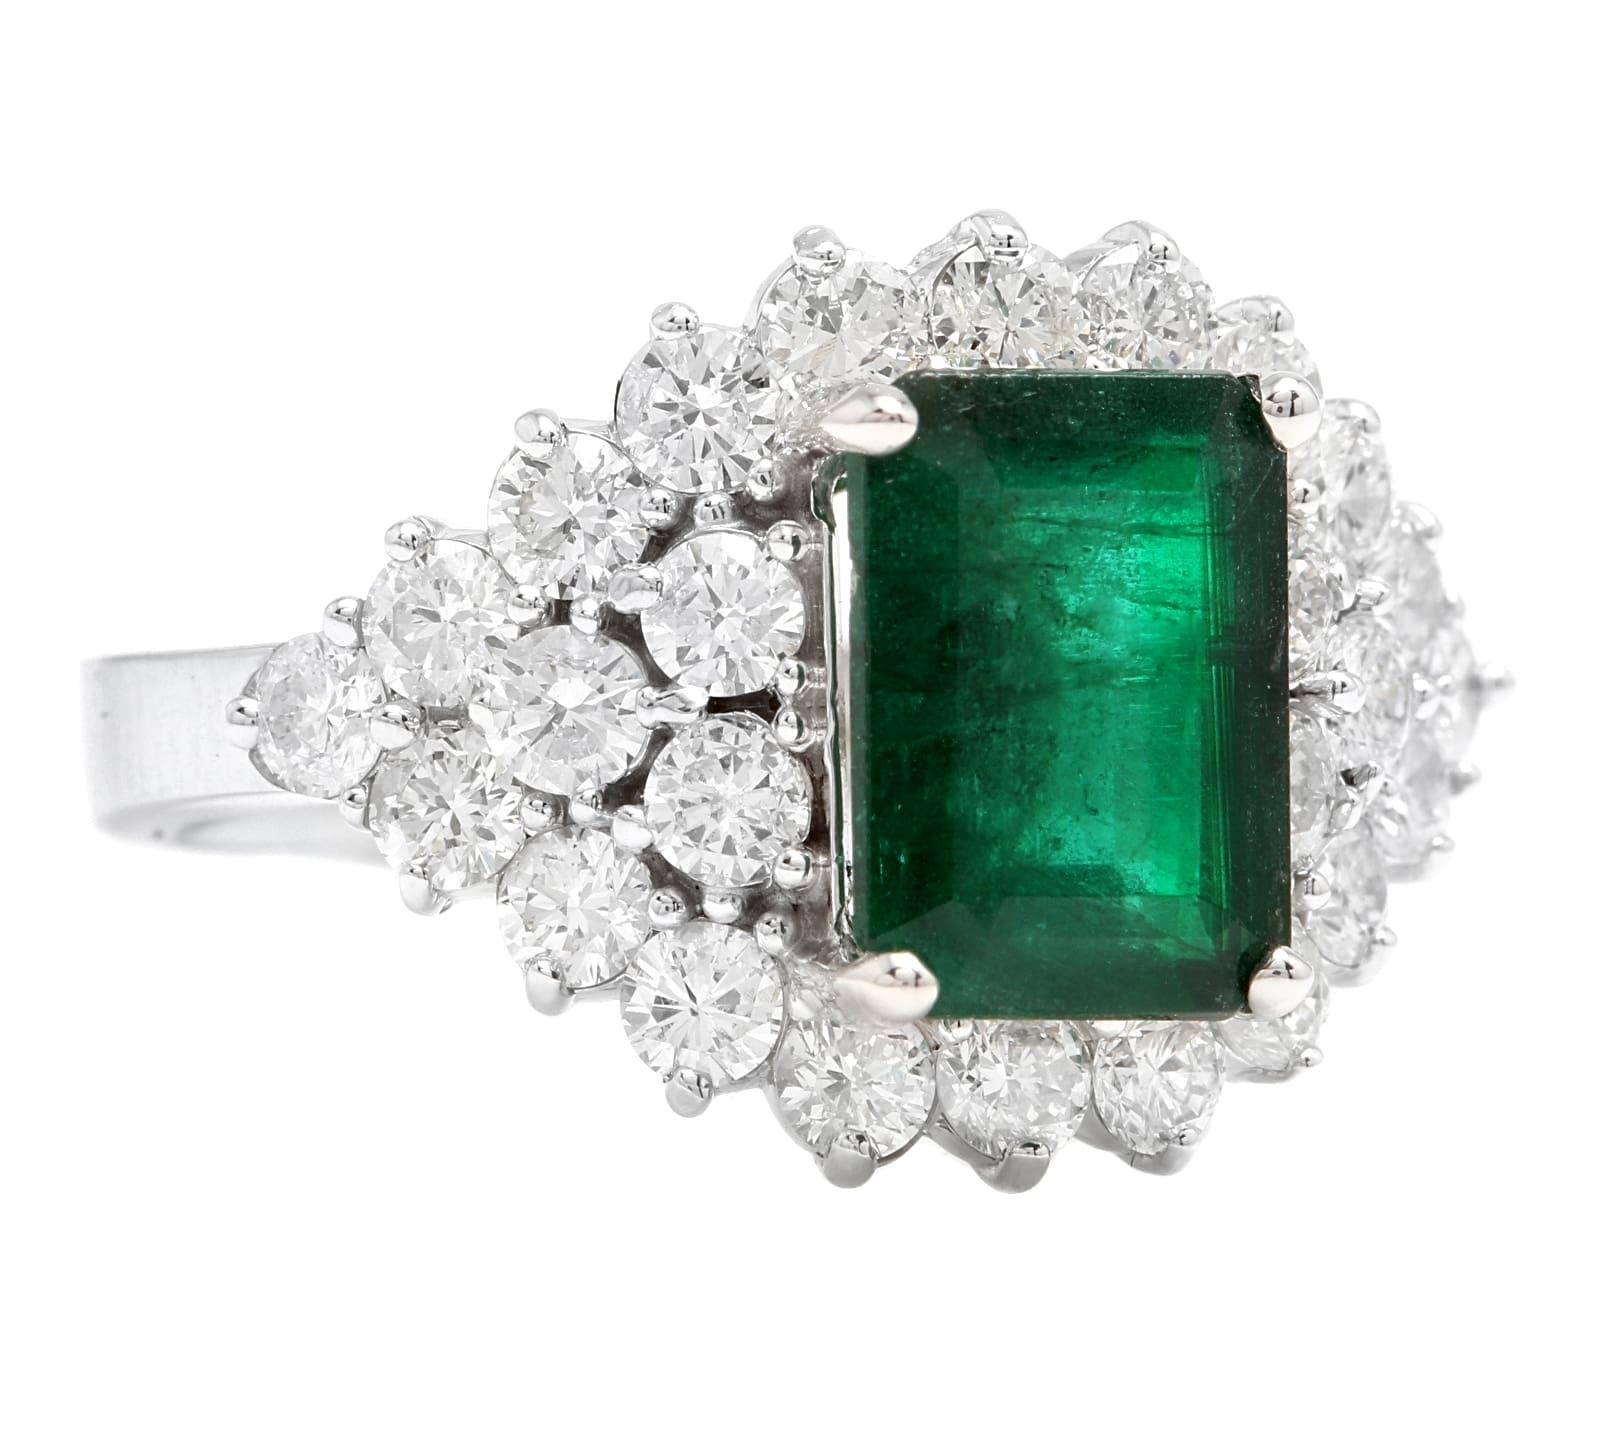 4.70 Carats Natural Emerald and Diamond 14K Solid White Gold Ring

Total Natural Green Emerald Weight is: Approx. 3.00 Carats (transparent)

Emerald Measures: Approx. 9.80 x 7.12mm

Emerald Treatment: Oiling

Natural Round Diamonds Weight: Approx. 